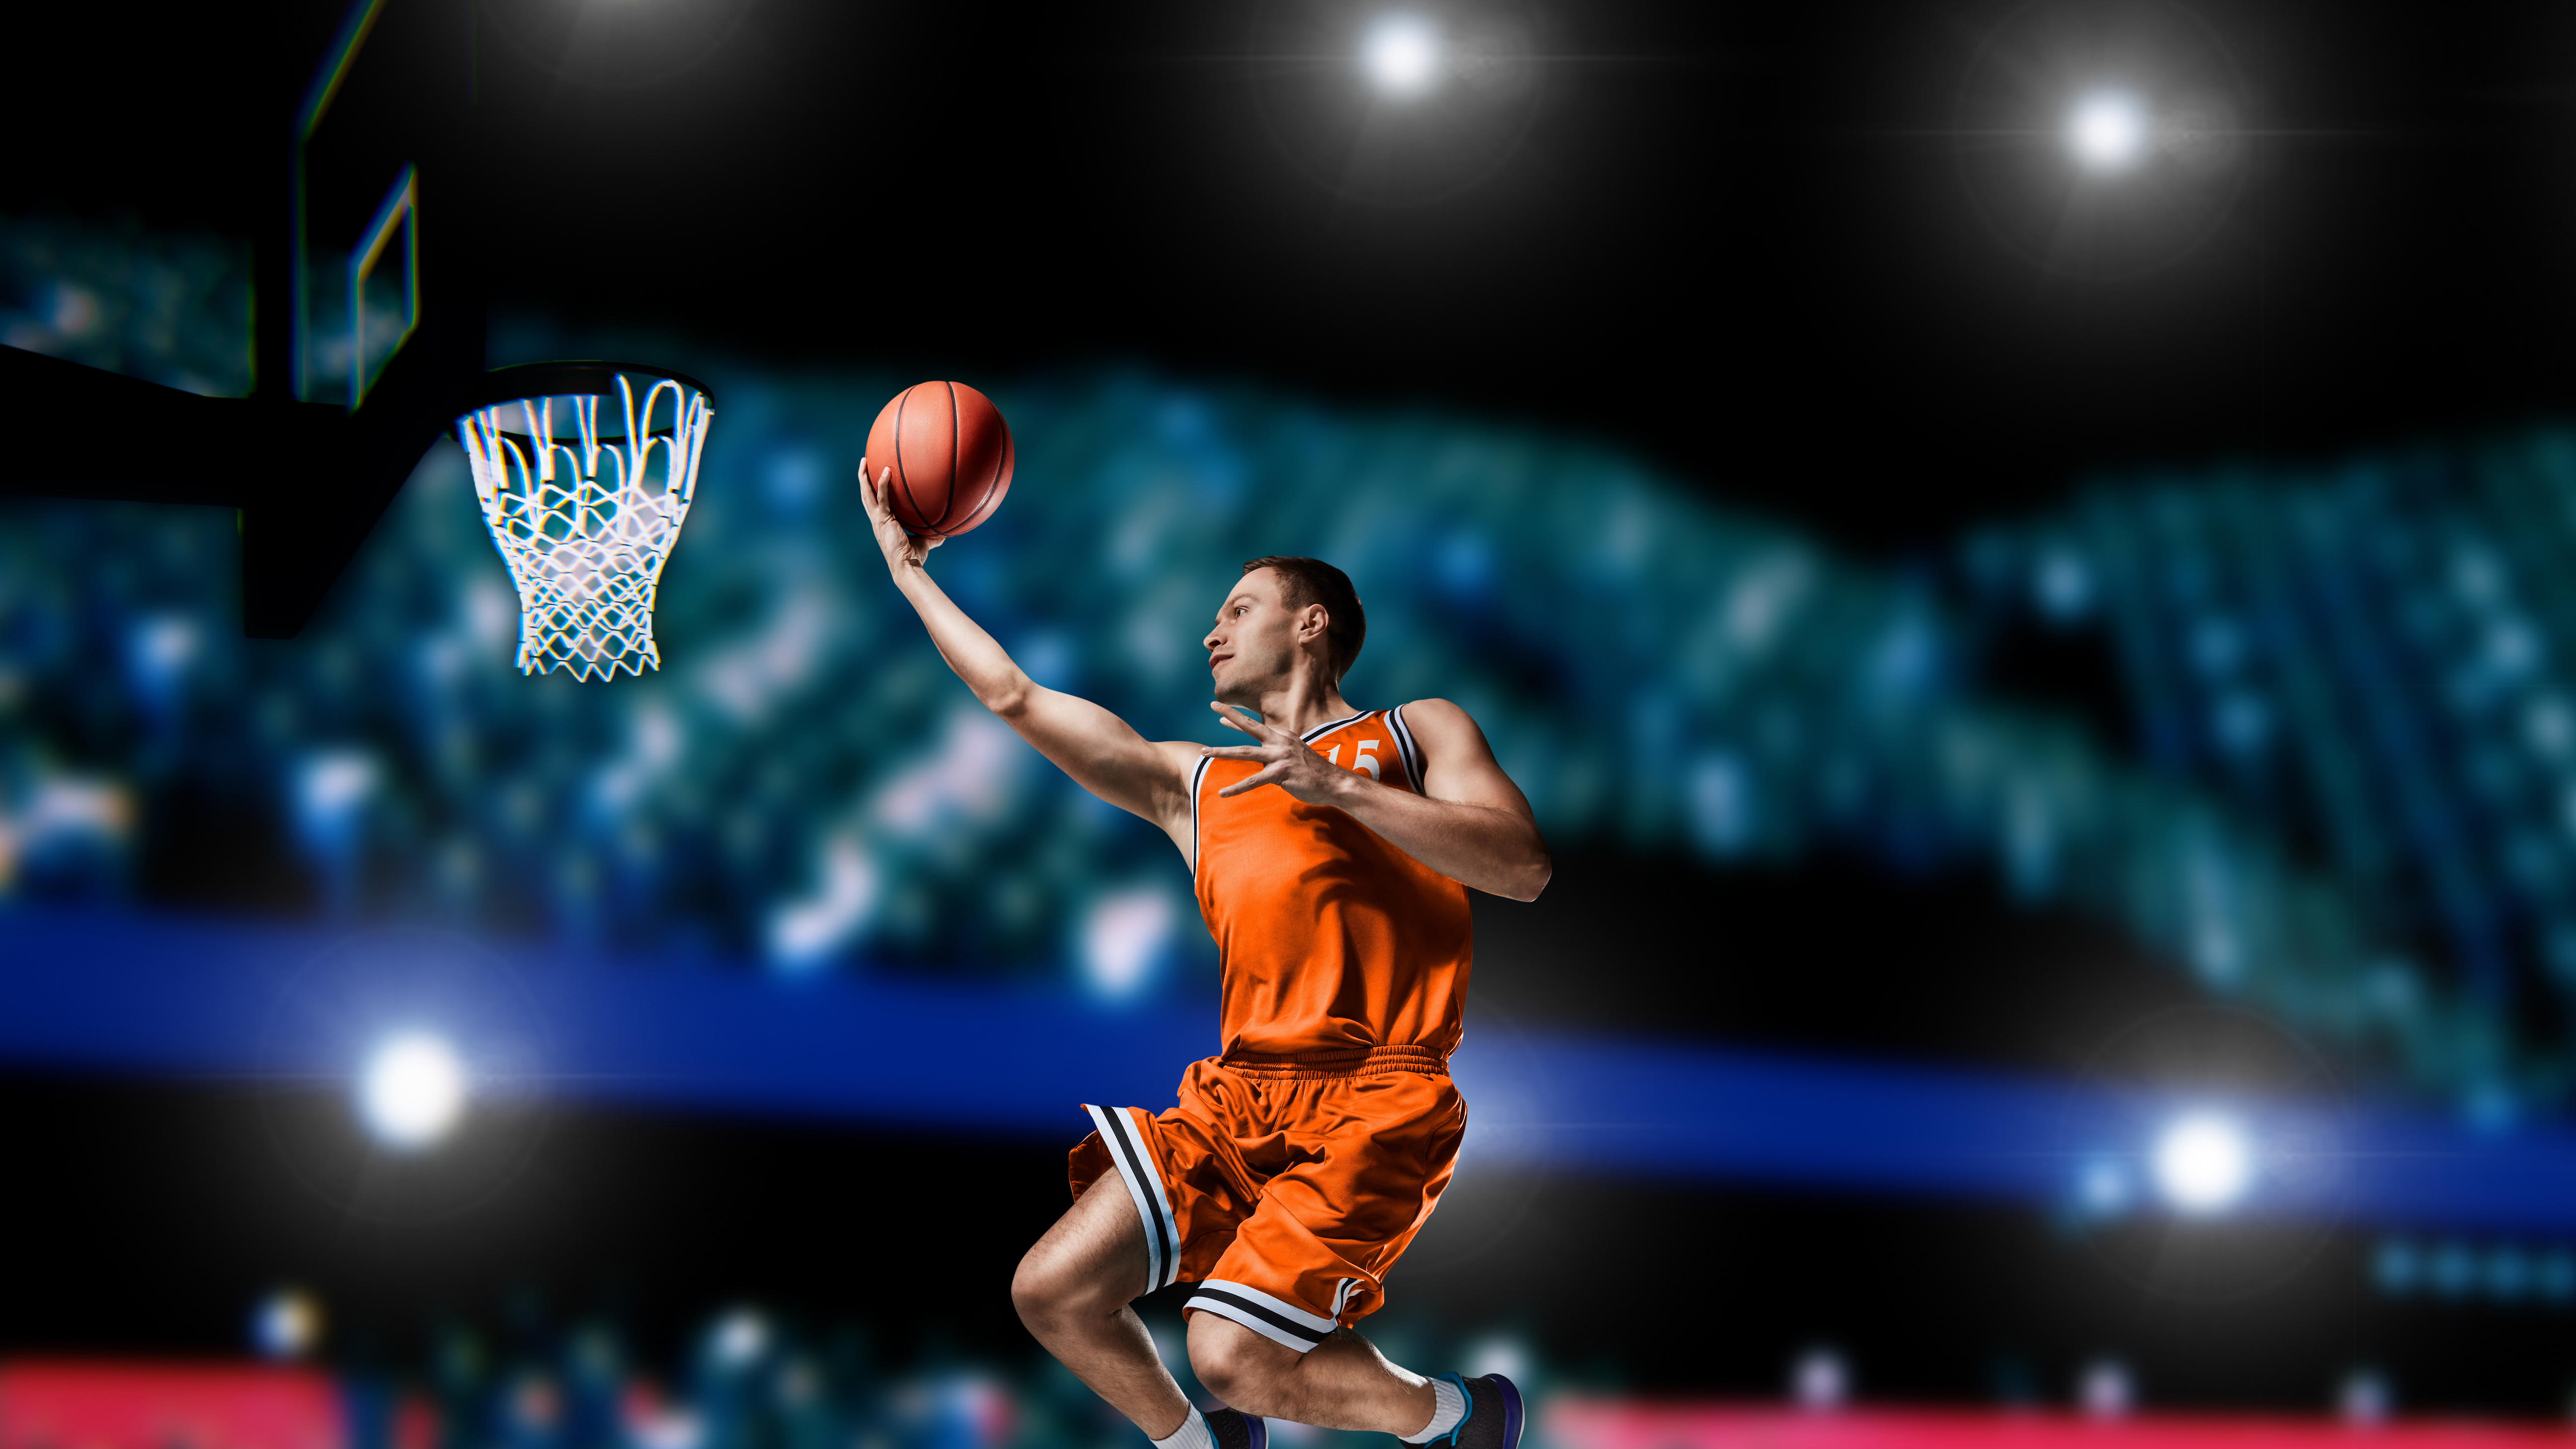 Download “A Perfectly Executed Red Ring Basketball Shot!” Wallpaper